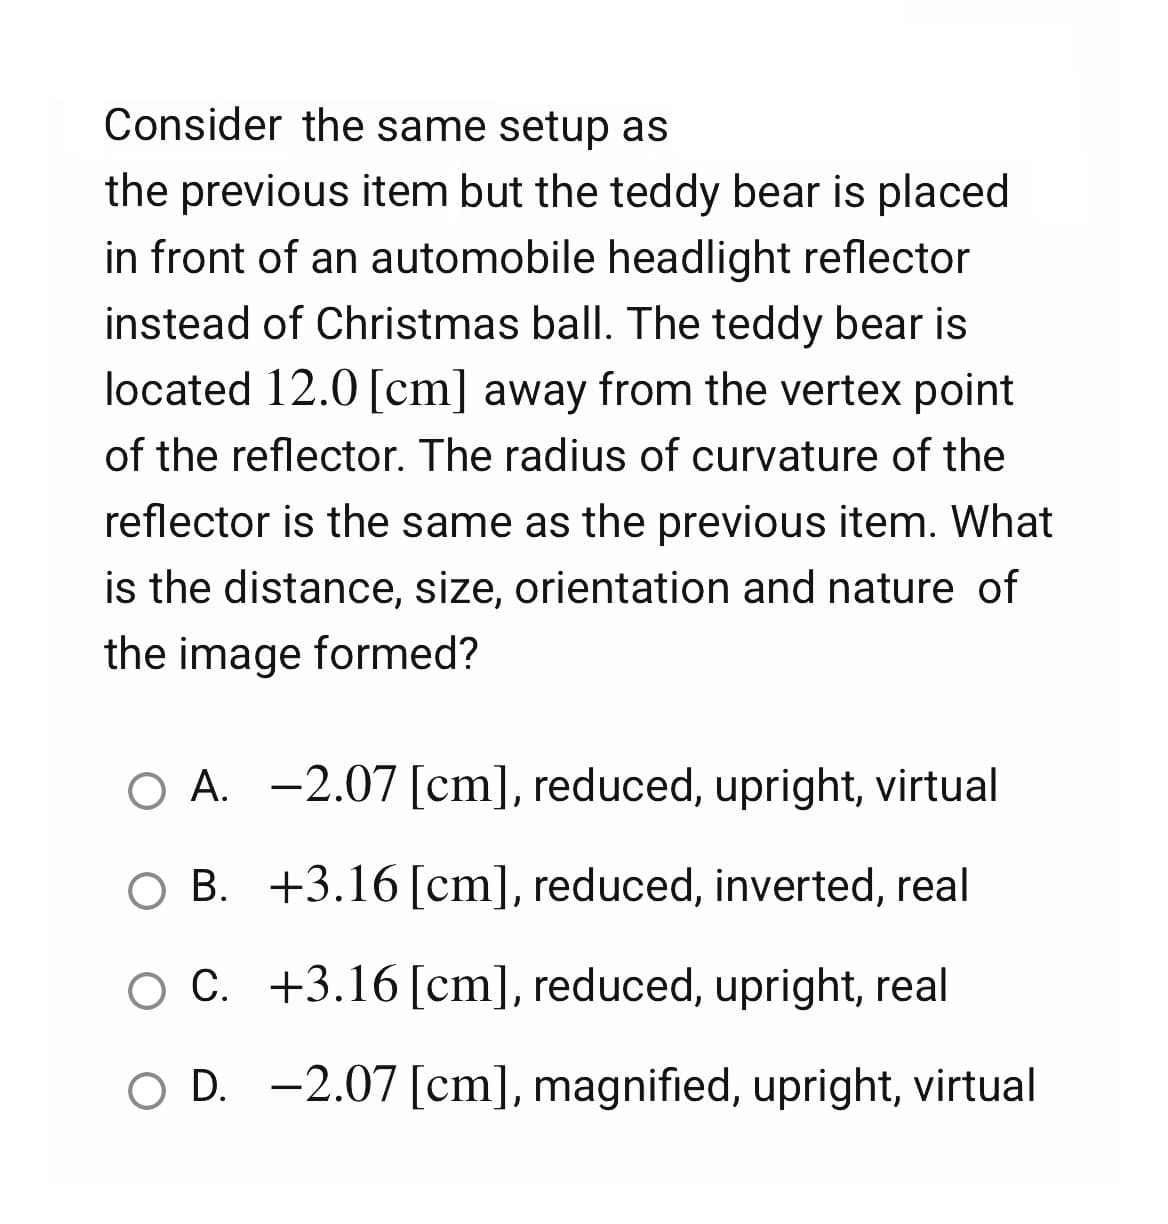 Consider the same setup as
the previous item but the teddy bear is placed
in front of an automobile headlight reflector
instead of Christmas ball. The teddy bear is
located 12.0 [cm] away from the vertex point
of the reflector. The radius of curvature of the
reflector is the same as the previous item. What
is the distance, size, orientation and nature of
the image formed?
O A. -2.07 [cm], reduced, upright, virtual
B. +3.16 [cm], reduced, inverted, real
O C. +3.16 [cm], reduced, upright, real
O D. -2.07 [cm], magnified, upright, virtual